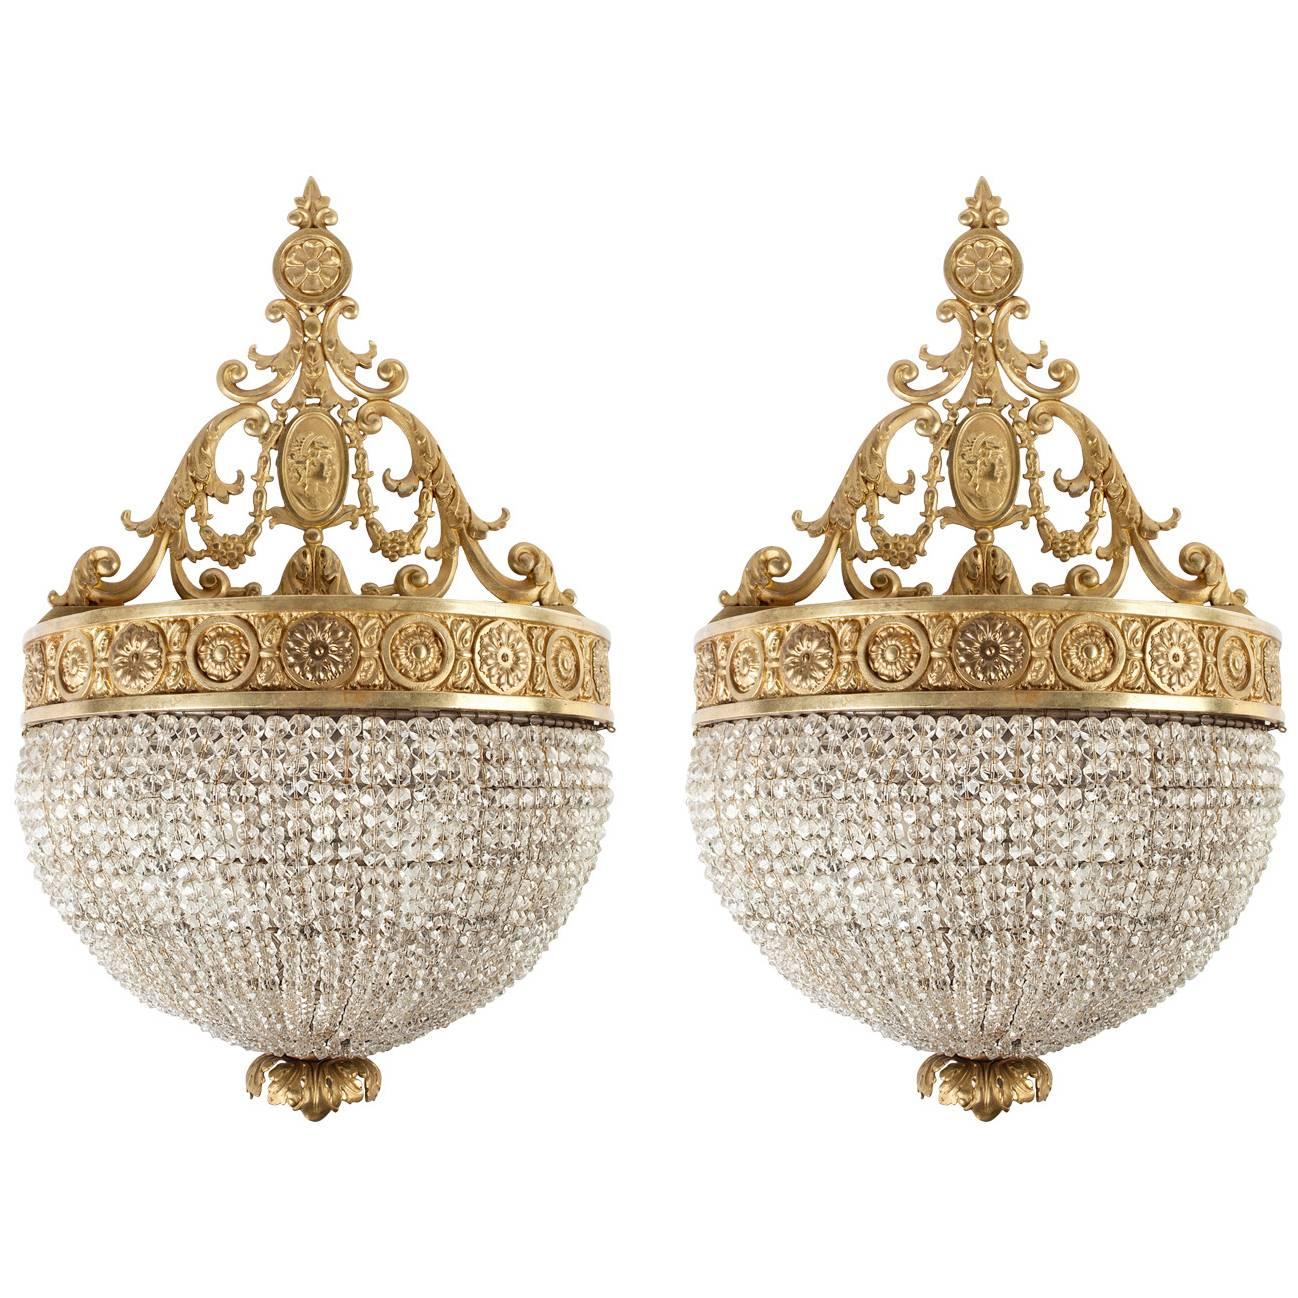 Gilded Brass Sconces with Cut Crystal Beaded Half Dome Bodies, Circa 1920s